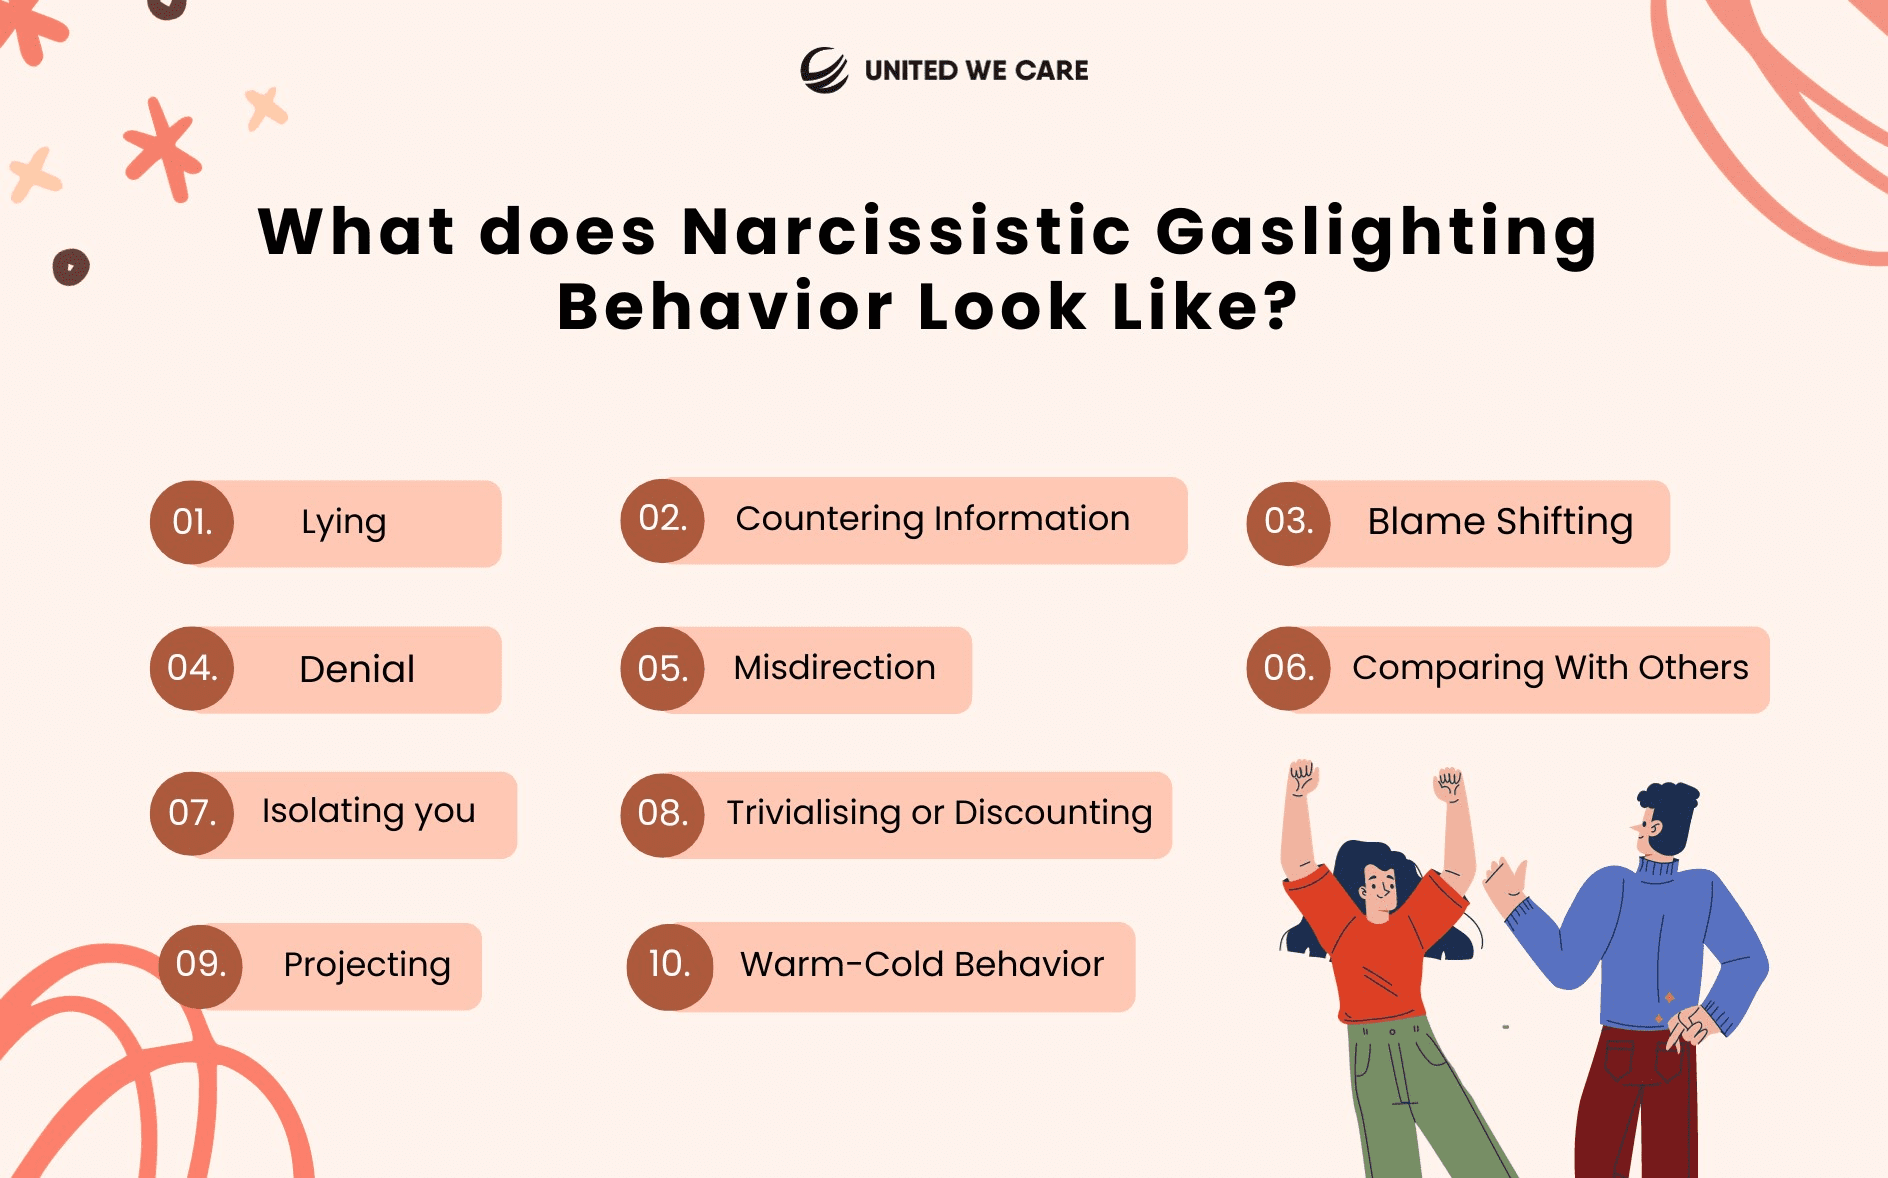 What is Narcissistic Gaslighting?